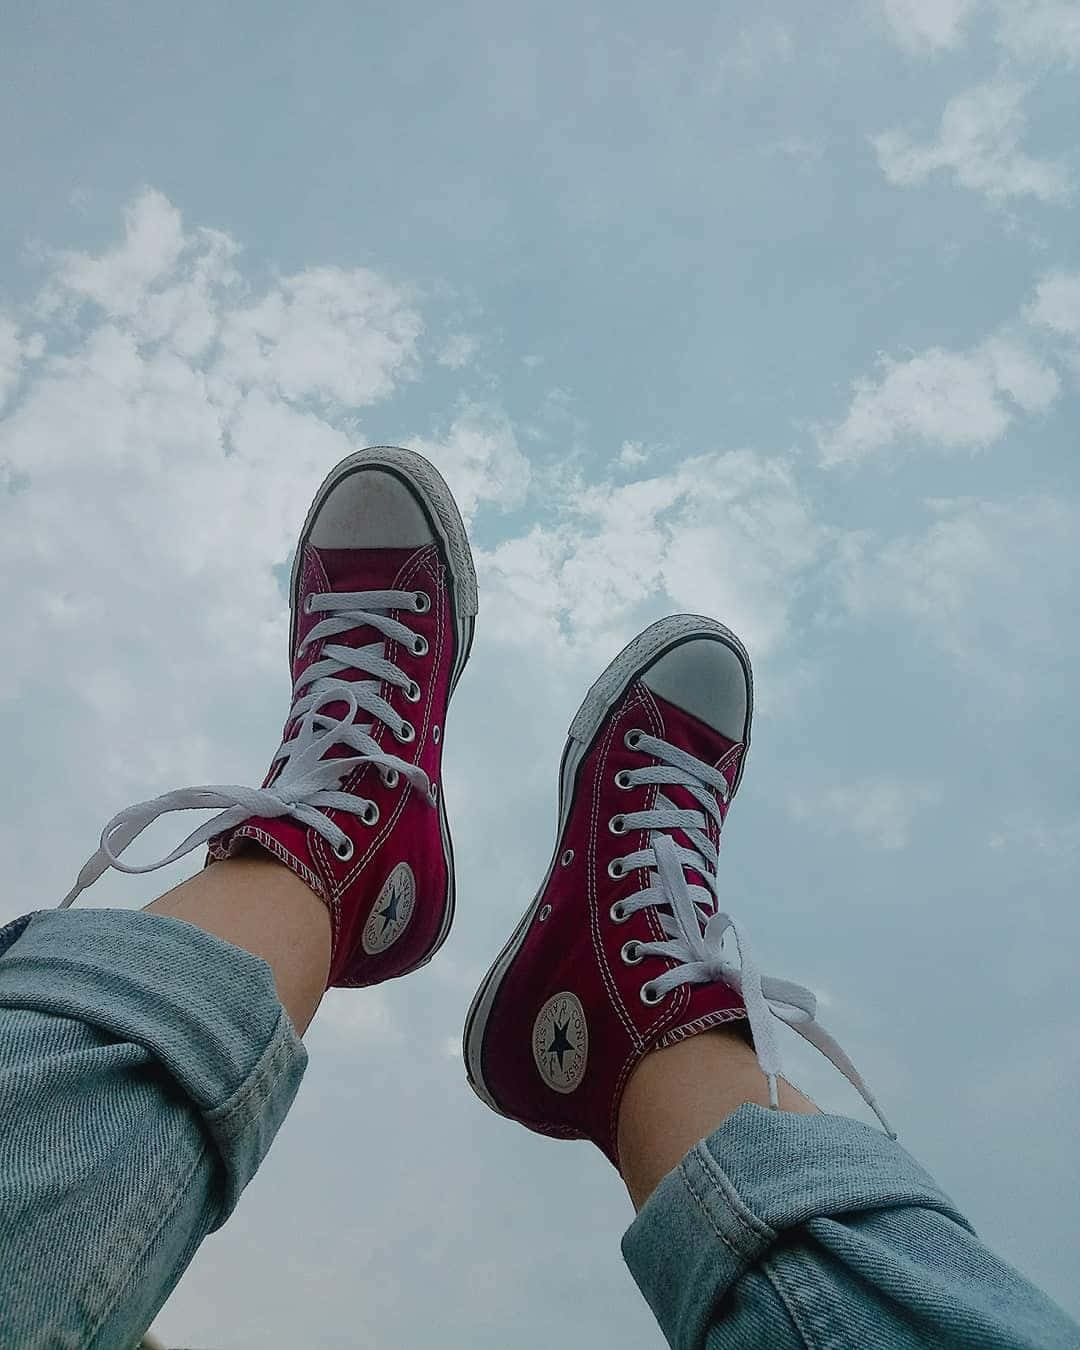 A Person's Feet In Red Converse